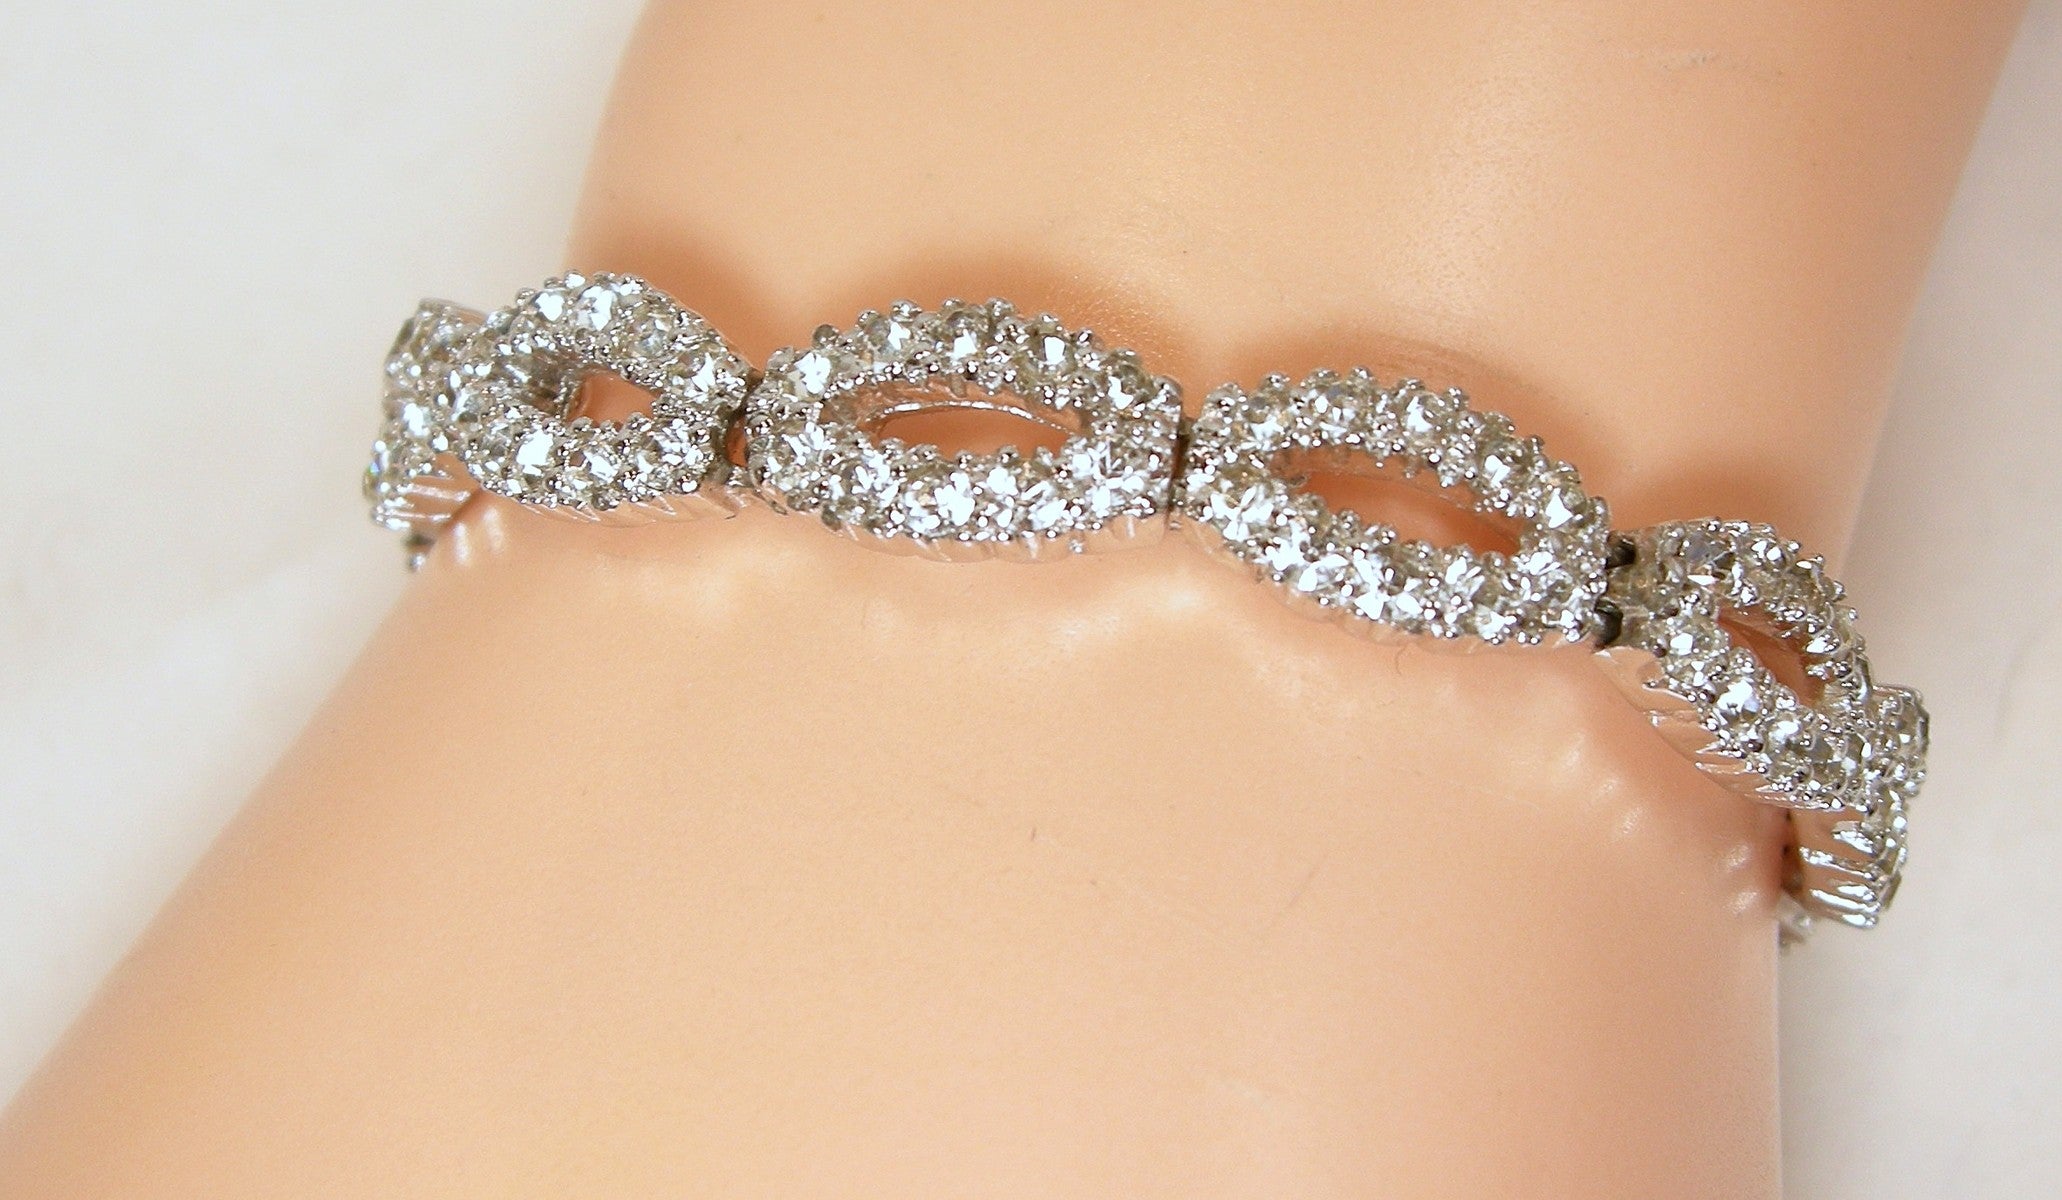 Chanel vintage jeweled chain belt – Dina C's Fab and Funky